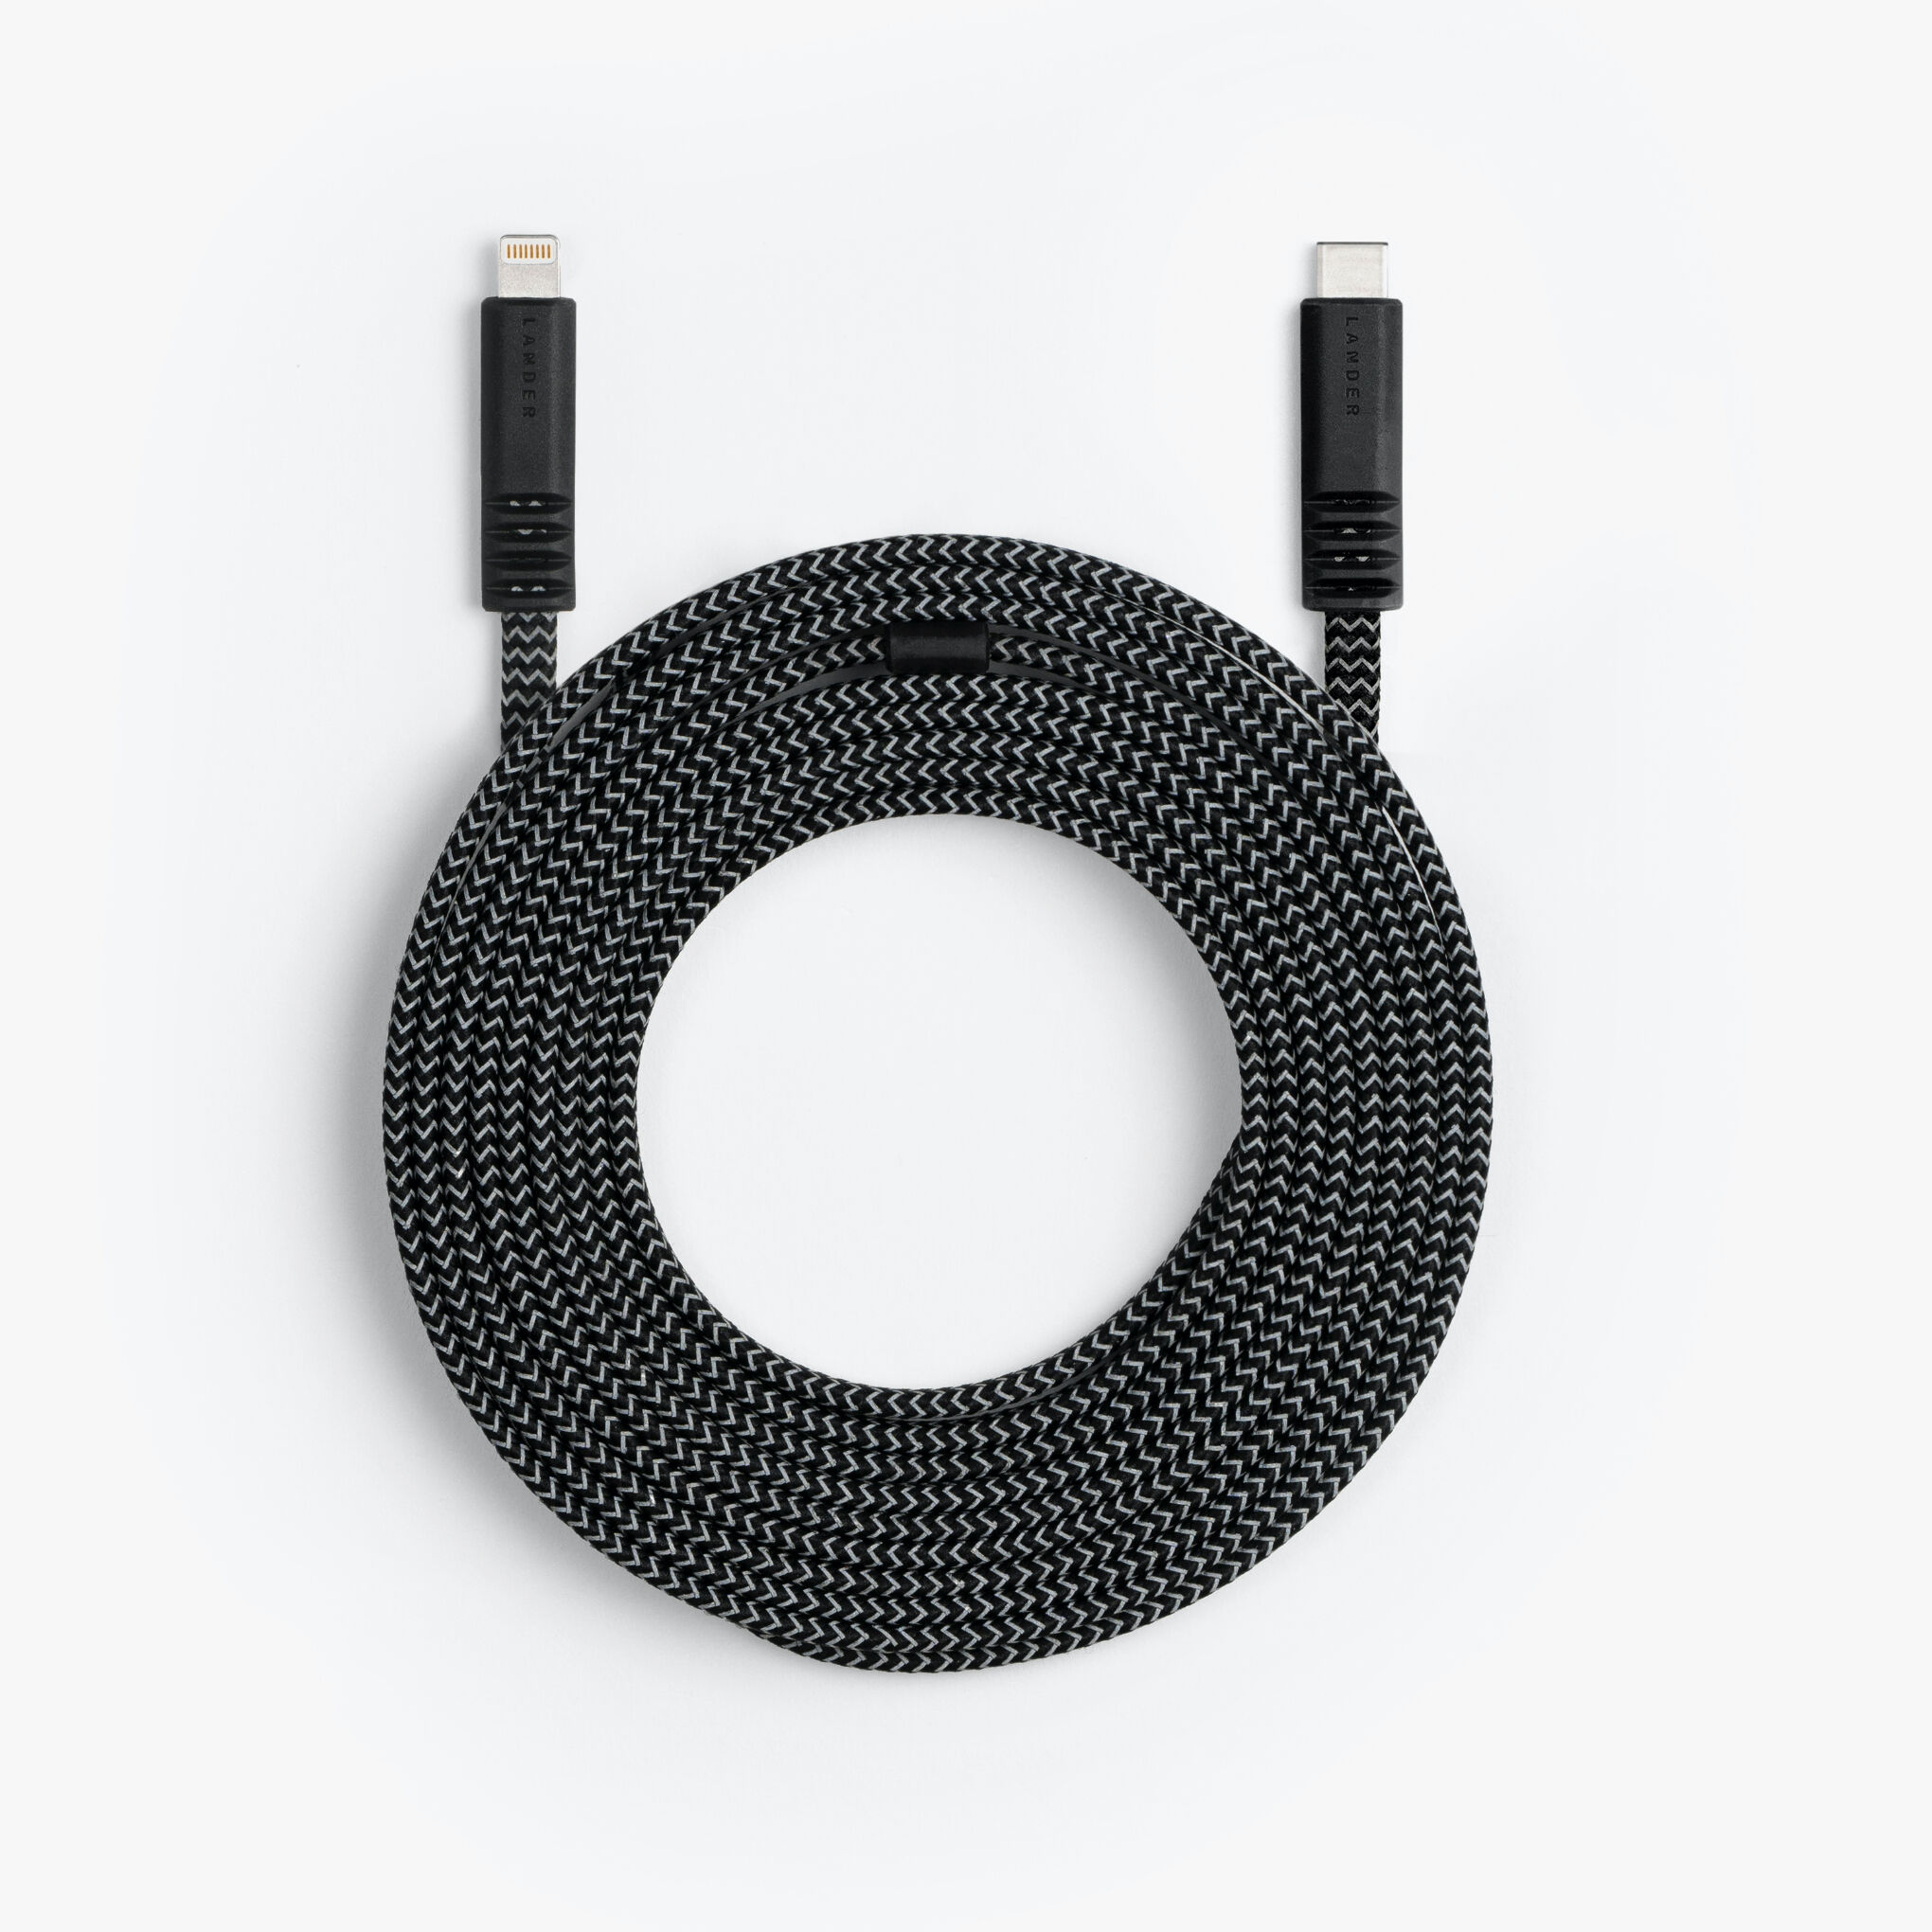 Protect and enhance your Cables